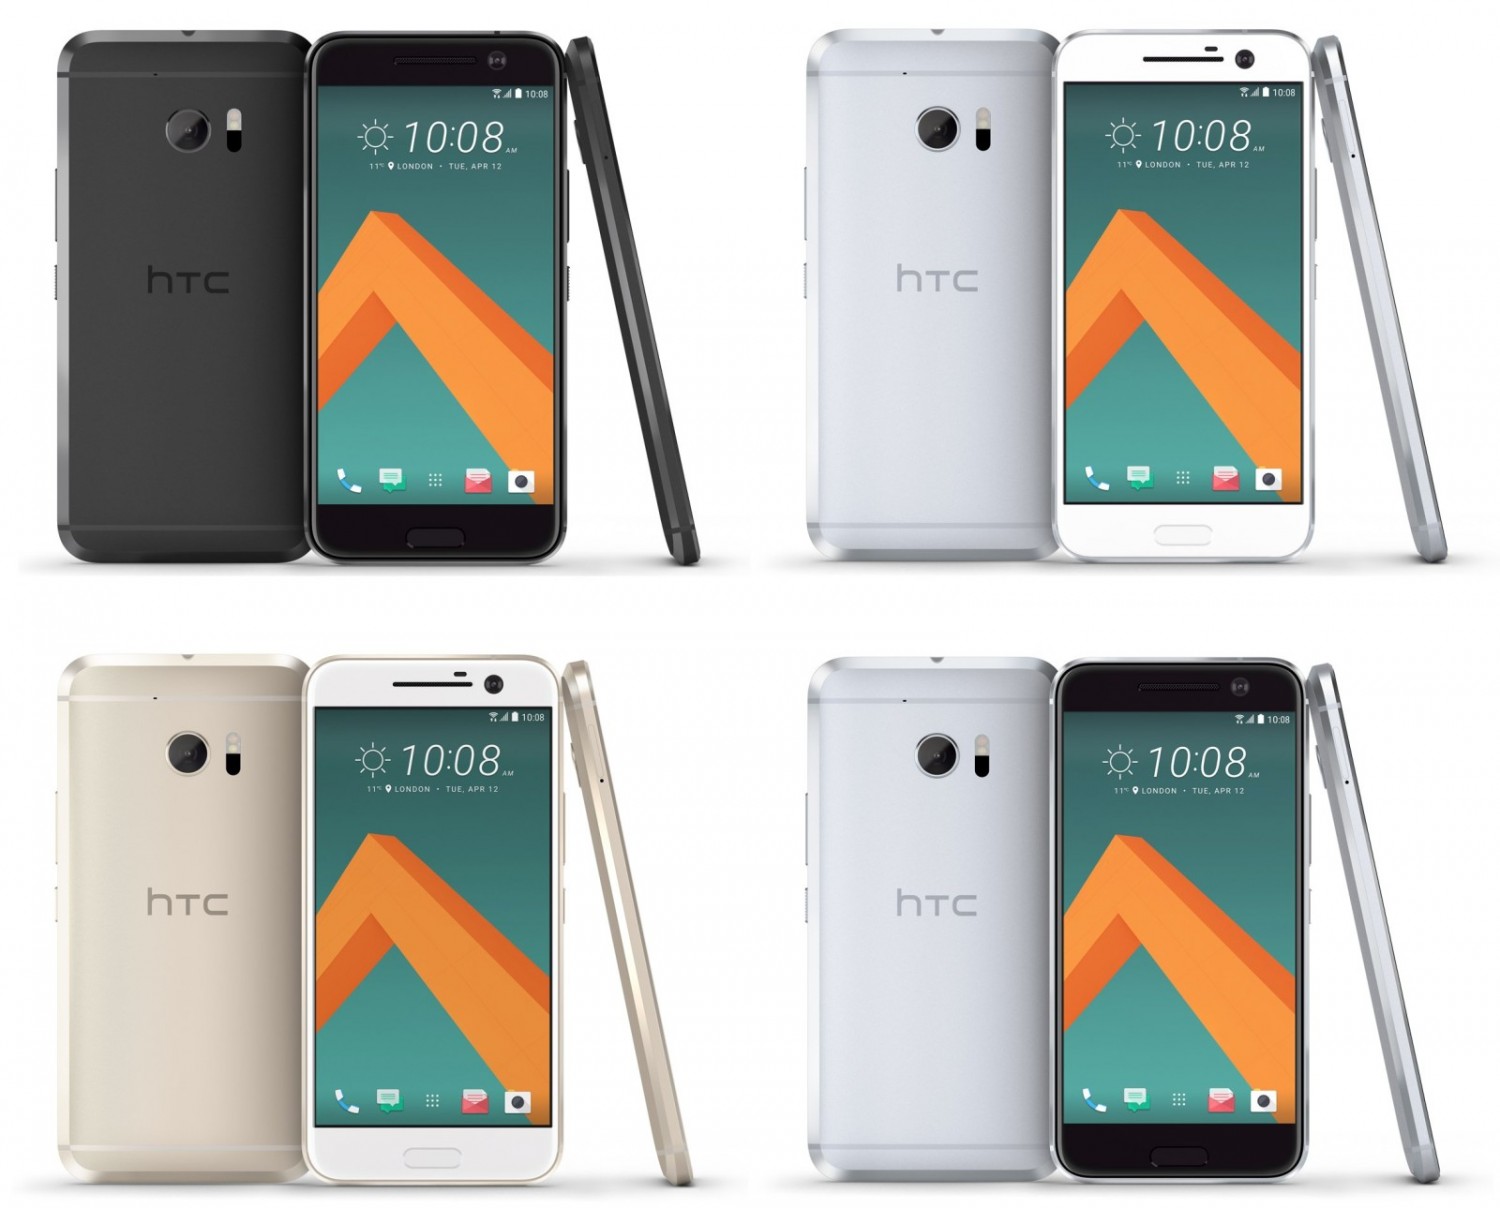 HTC 10 with 5.2-inch Quad HD Super LCD display 